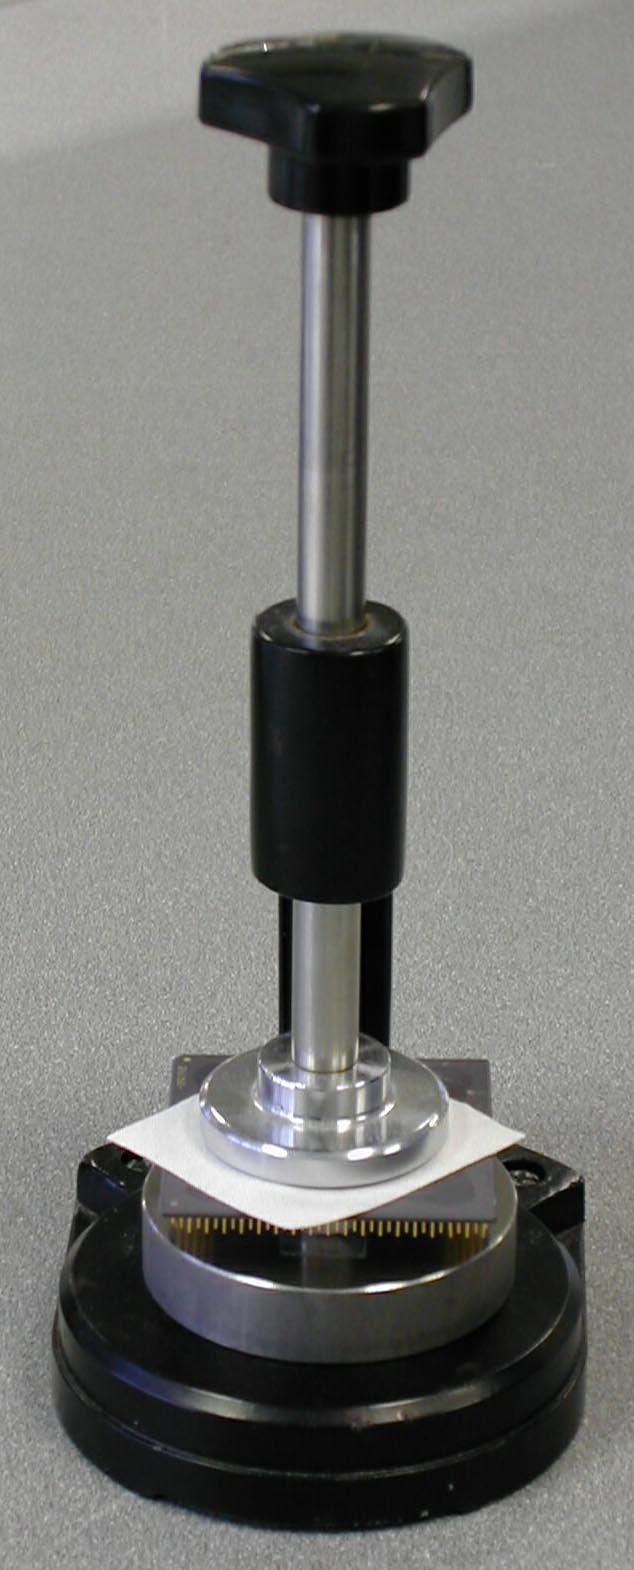 Procedure 1. Calibrate the MultiPrep System according to the procedures in the manual. 2. Place the parallel polishing fixture that was used for calibration onto the hot plate and heat to 175 C. 3.